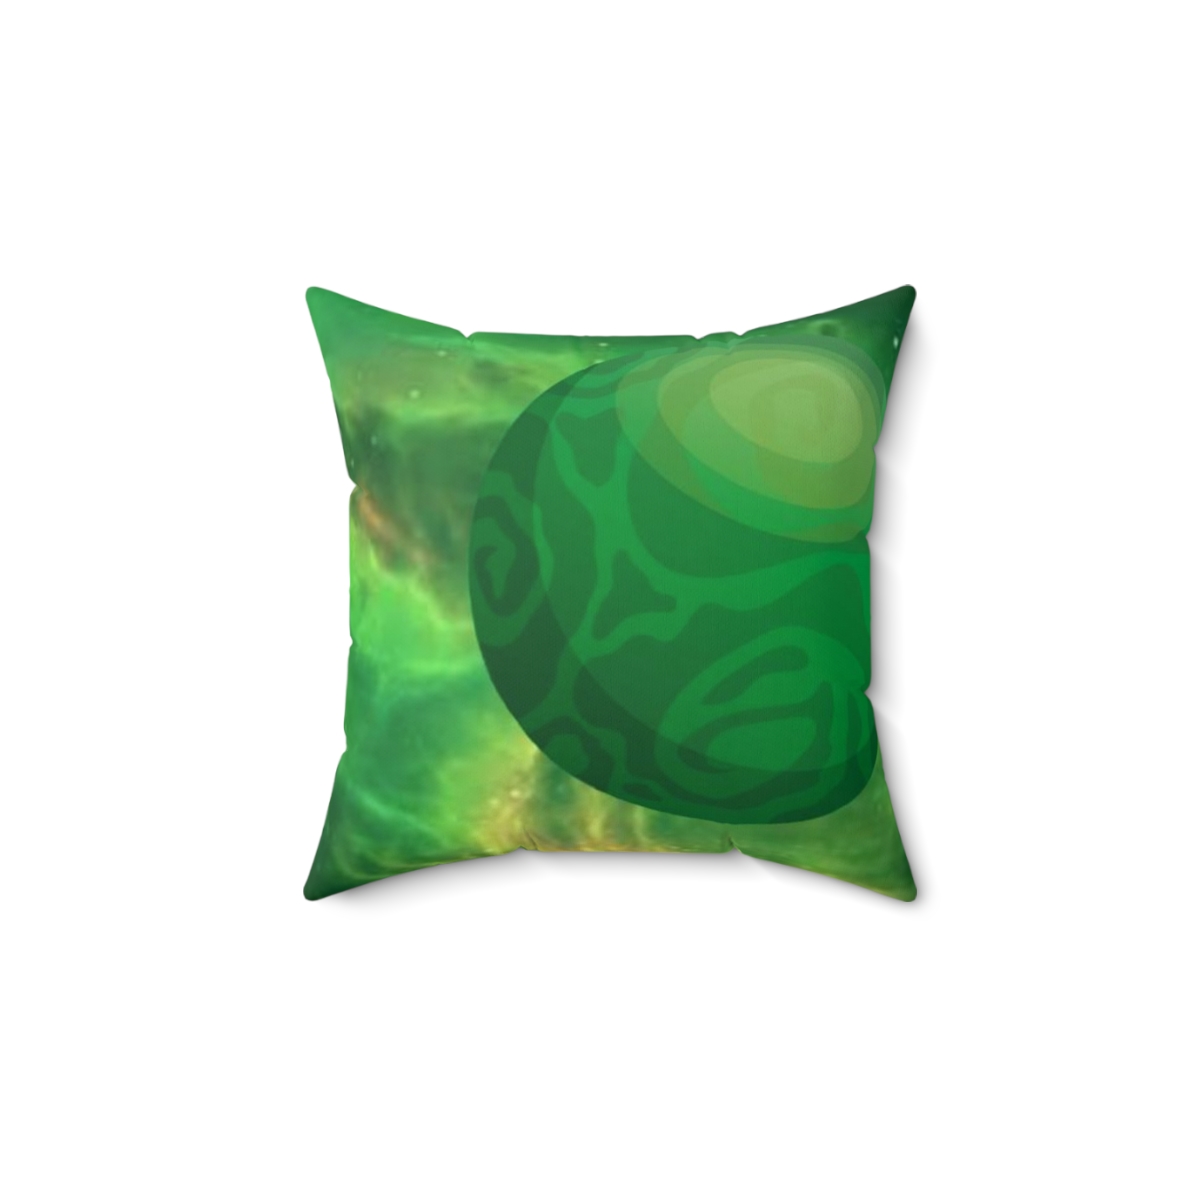 Green Planets Spun Polyester Square Pillow product thumbnail image